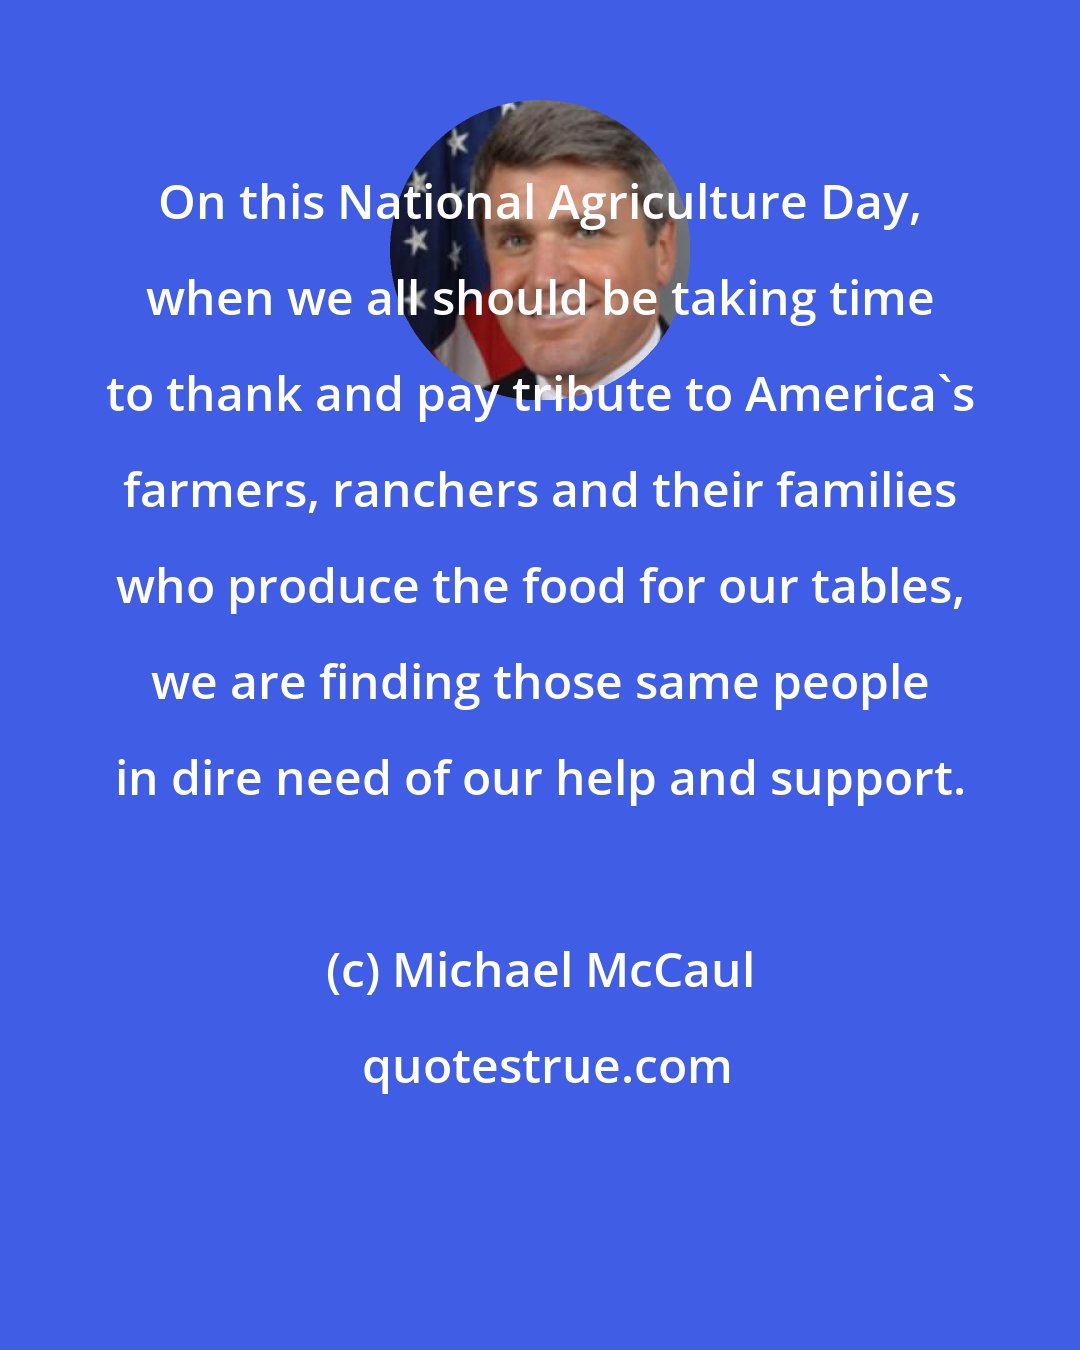 Michael McCaul: On this National Agriculture Day, when we all should be taking time to thank and pay tribute to America's farmers, ranchers and their families who produce the food for our tables, we are finding those same people in dire need of our help and support.